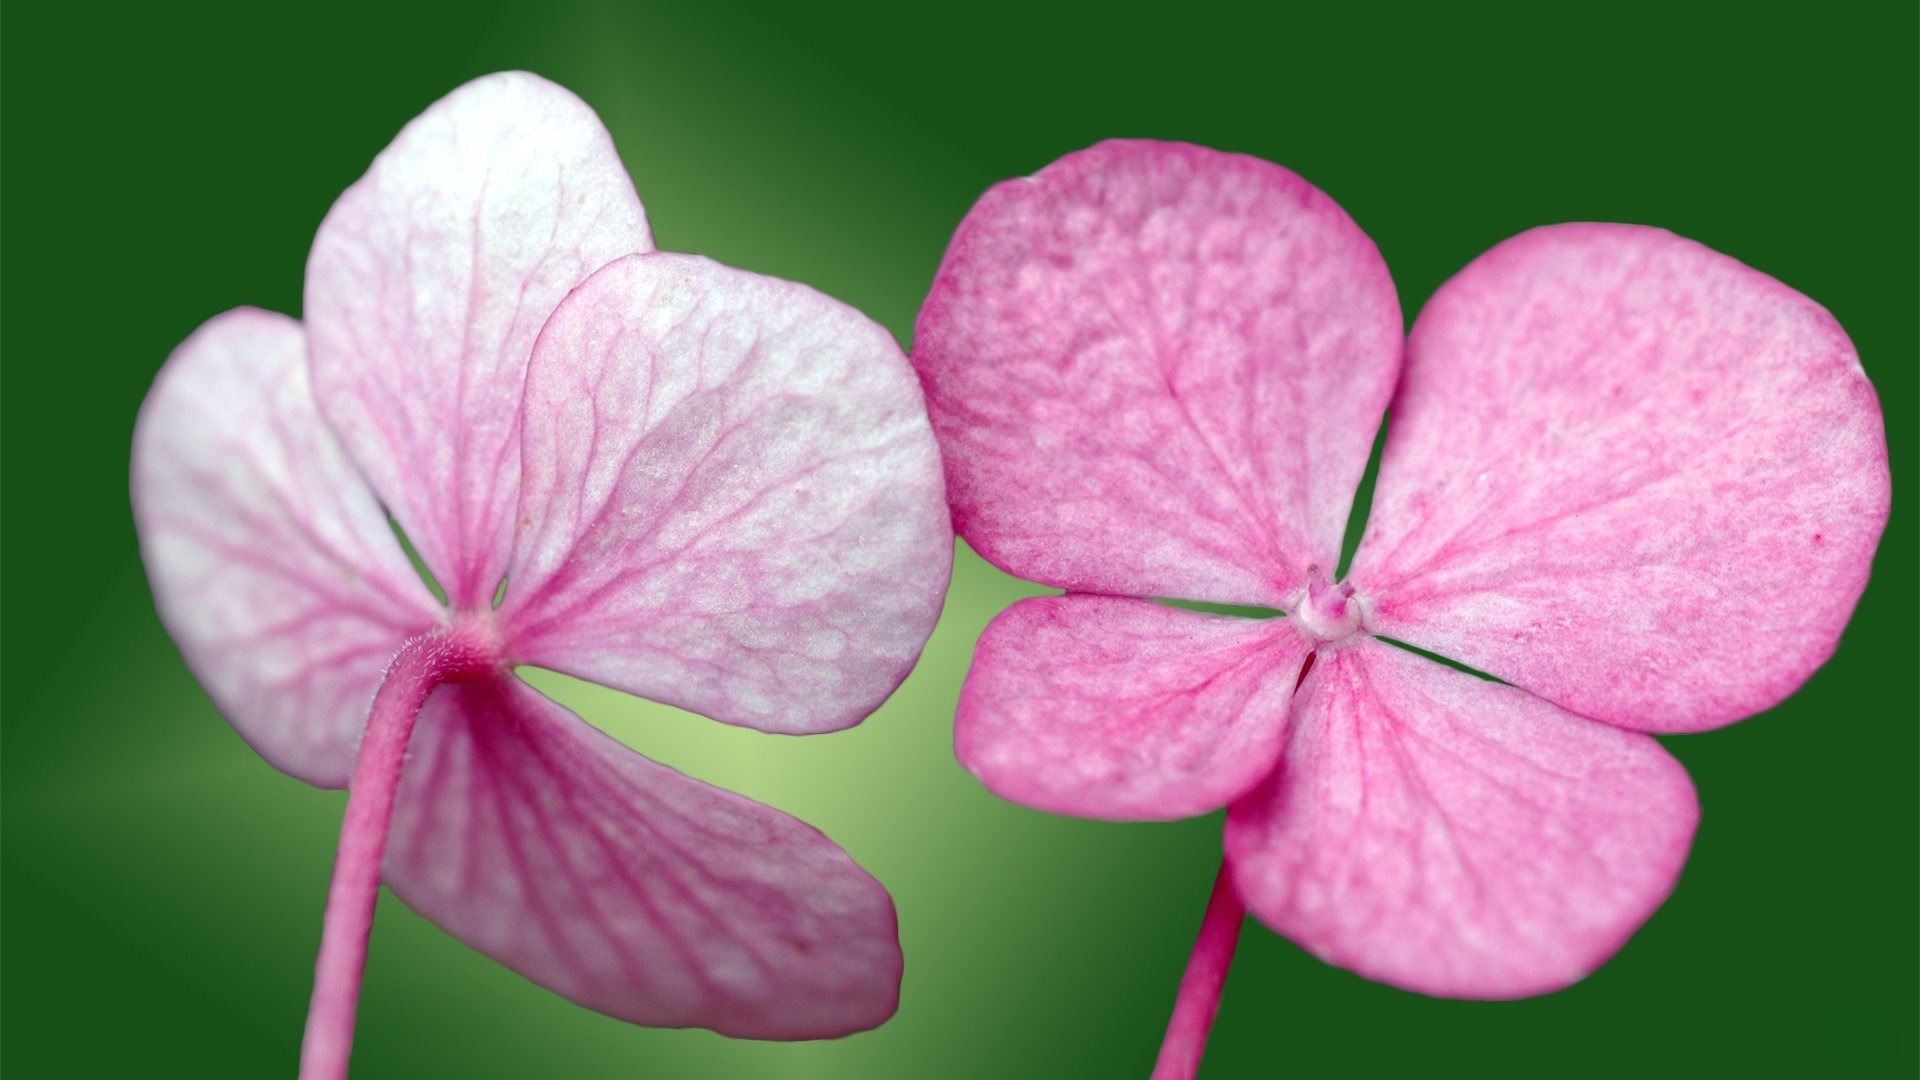 Pairs of flowers and green leaves wallpaper (1) #1 - 1920x1080